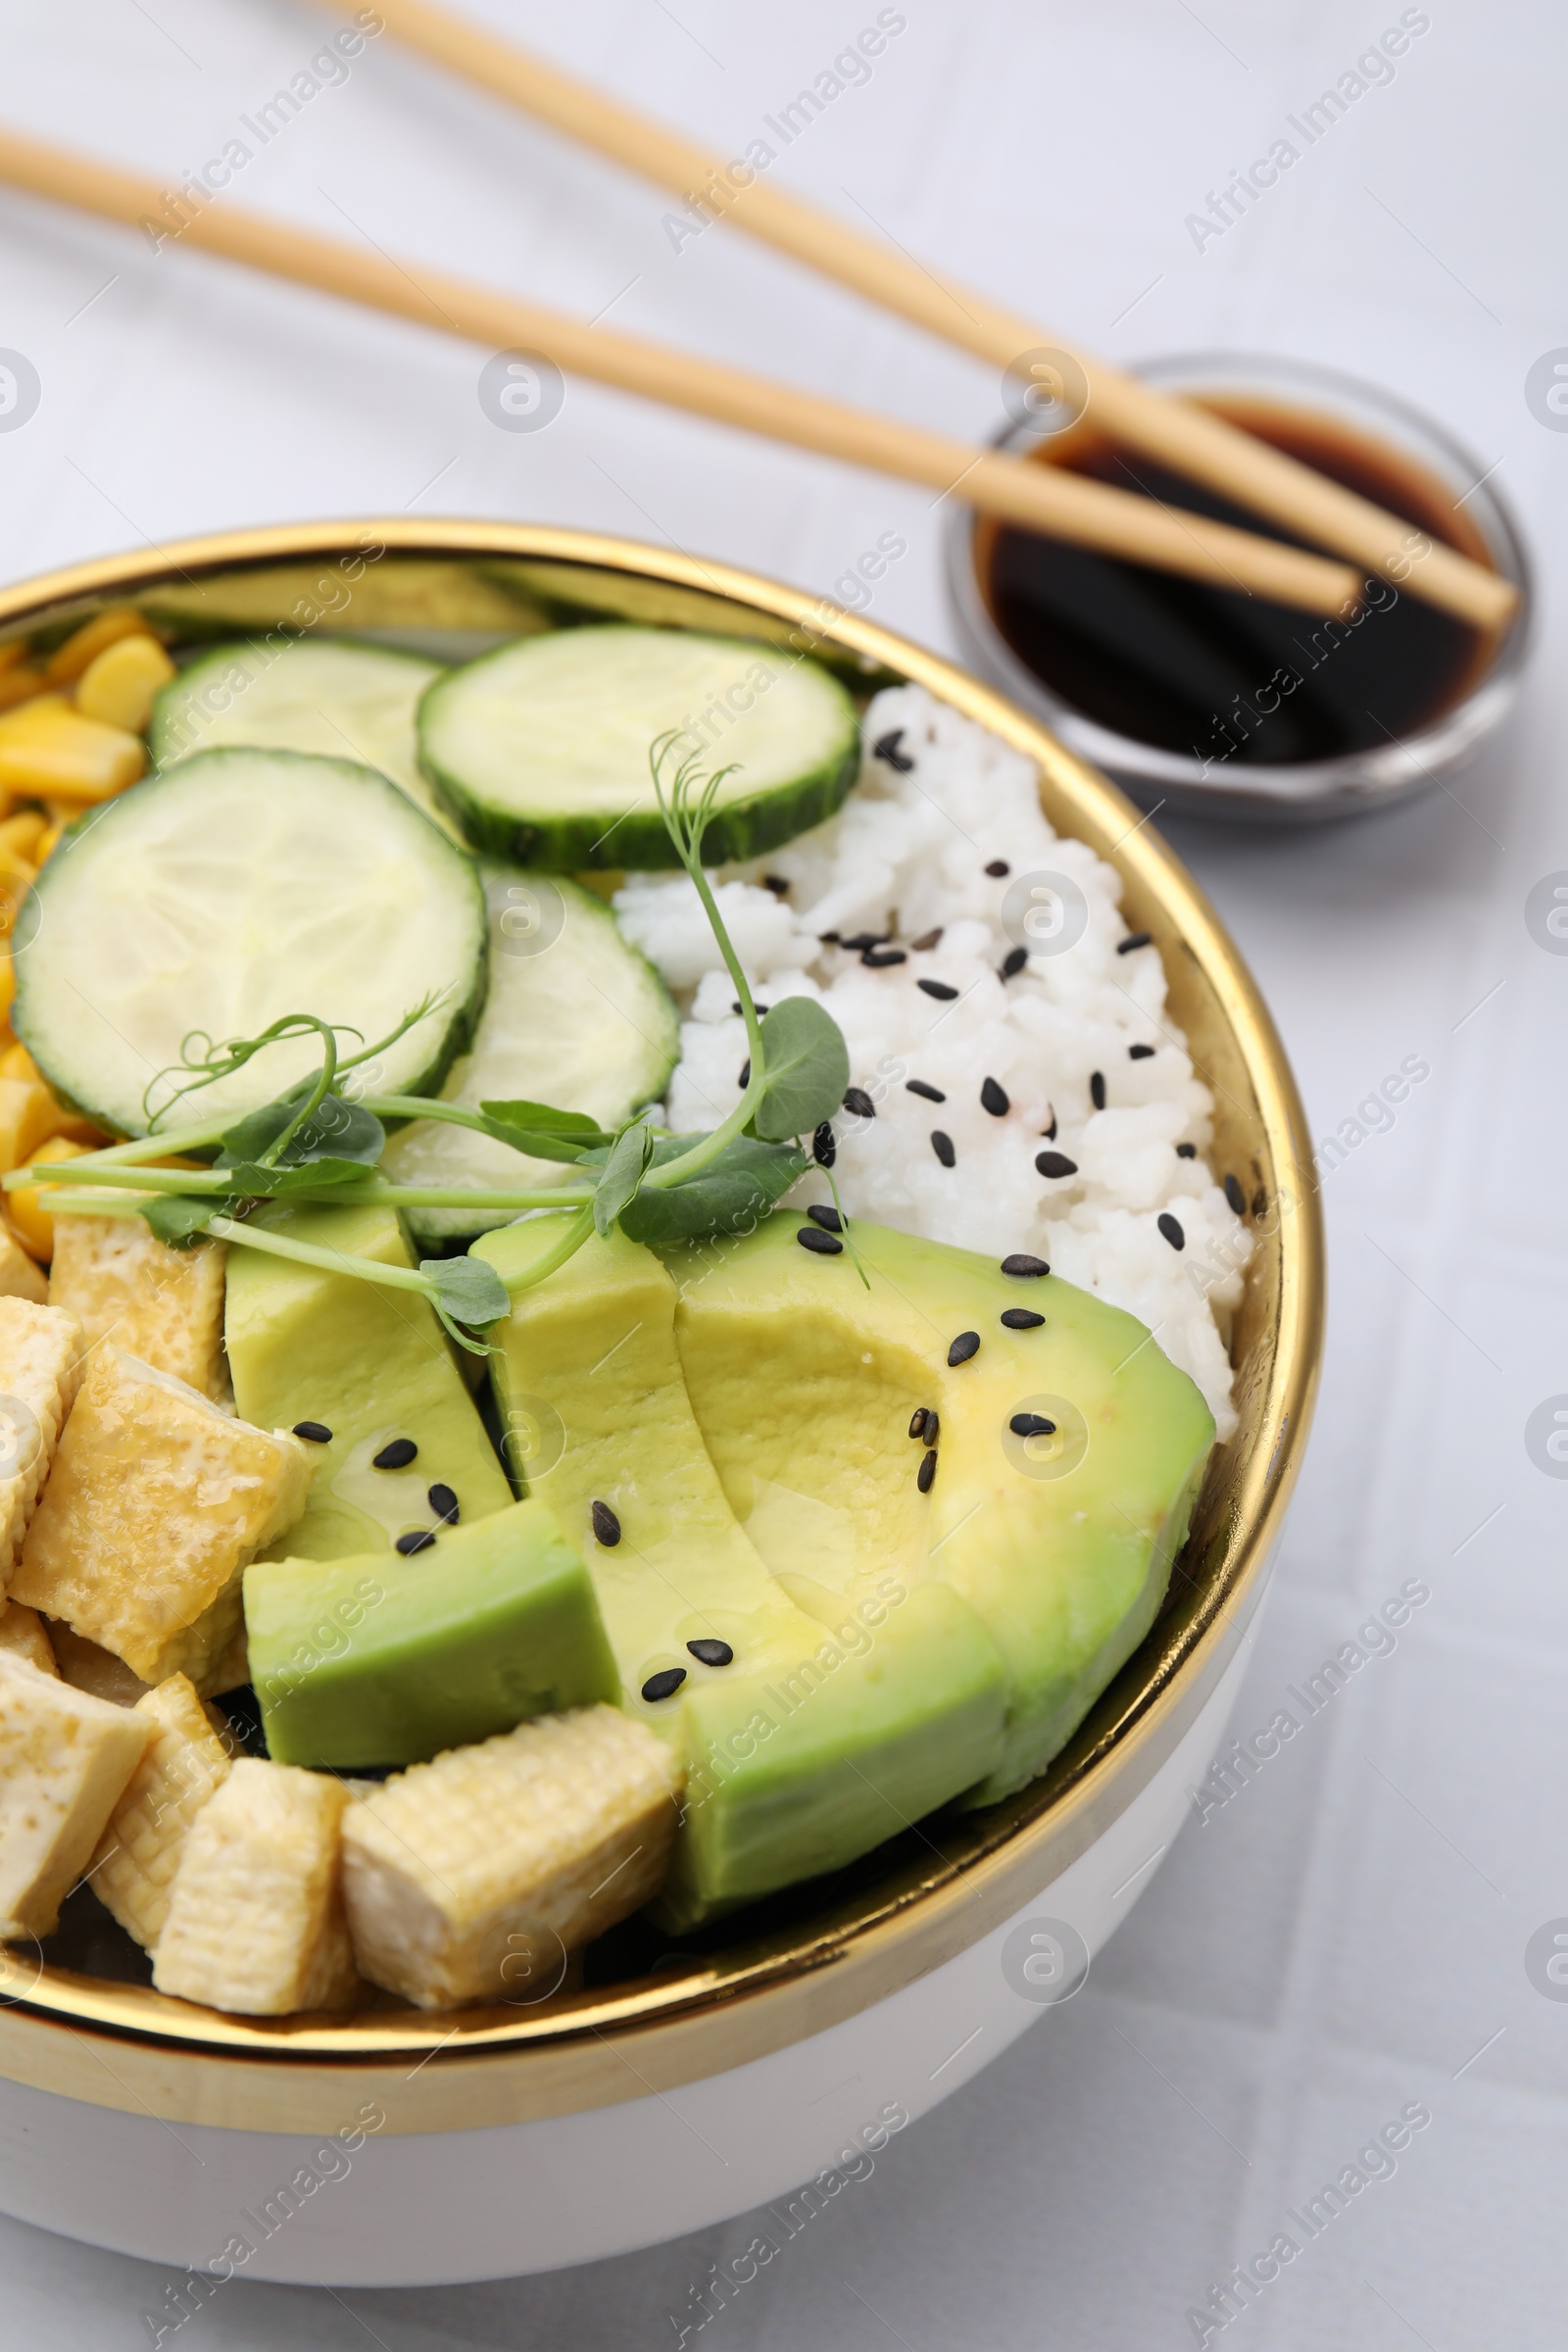 Photo of Delicious poke bowl with vegetables, tofu, avocado and microgreens served on white tiled table, closeup